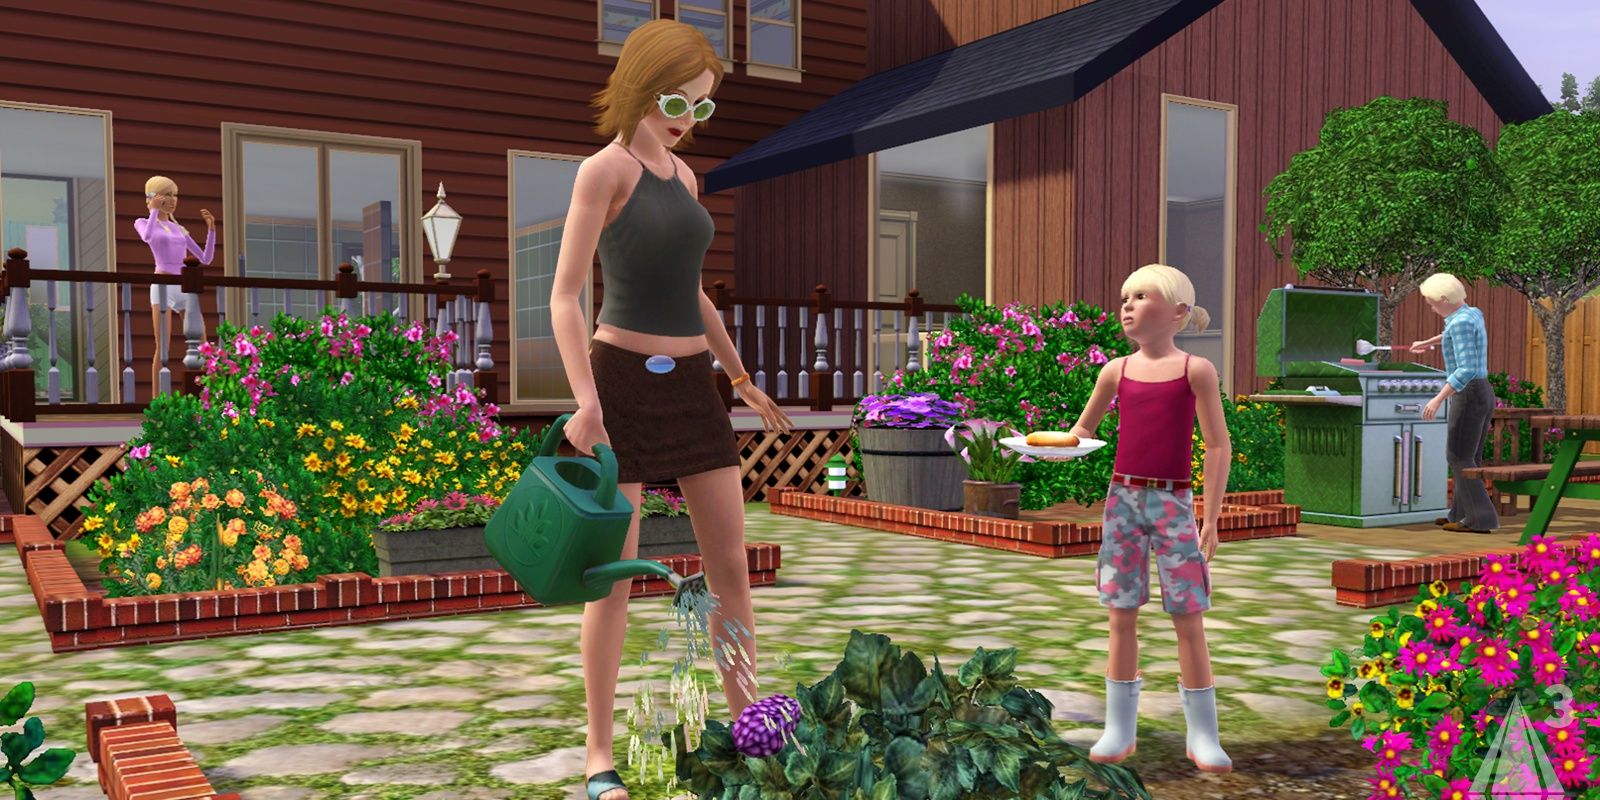 A woman waters flowers in The Sims 3